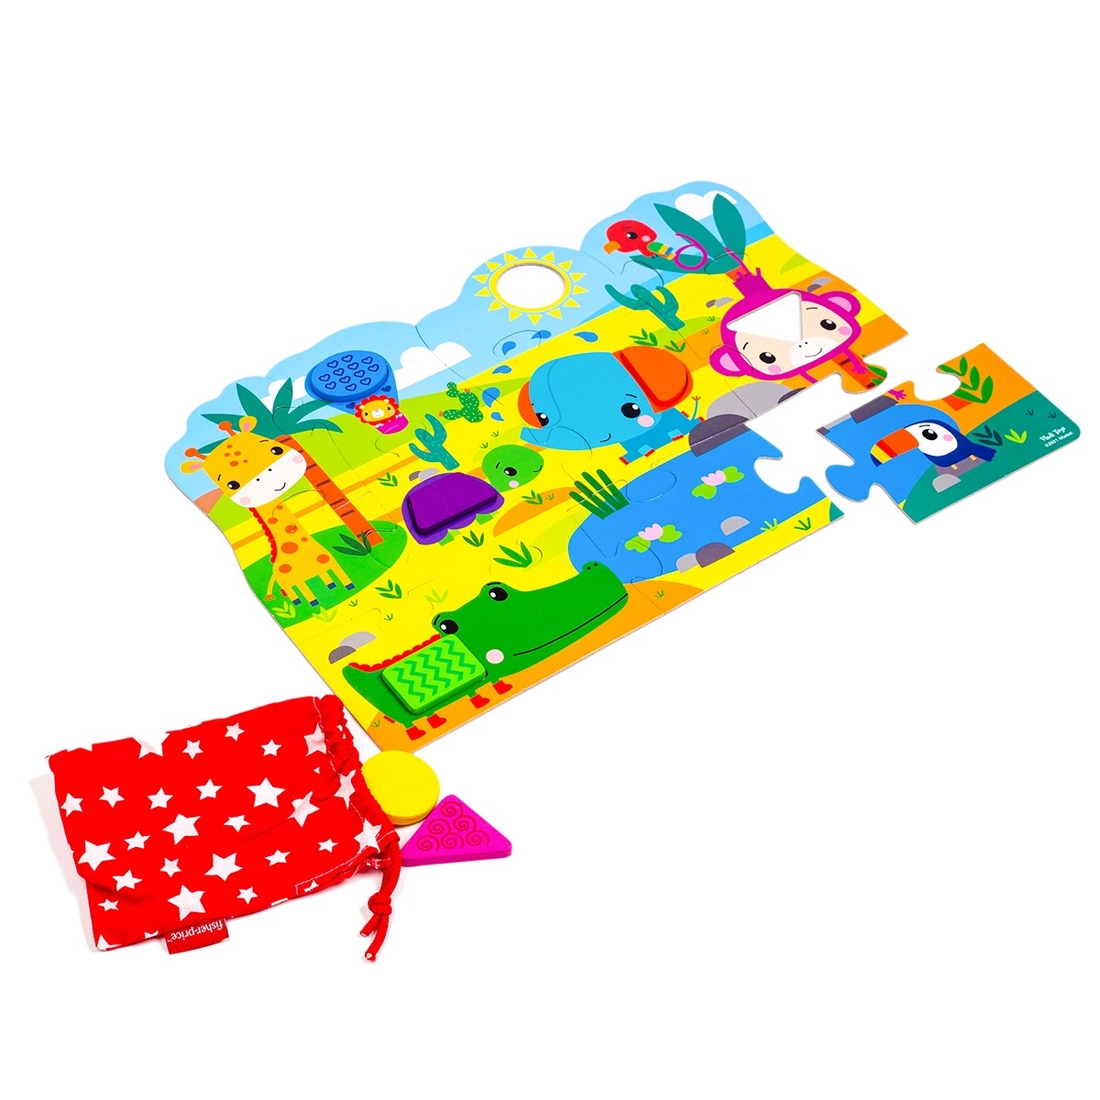 Фото Пазл "Fisher-Price. Maxi puzzle & wooden pieces" Vladi Toys VT1100-01 (4820234762071)